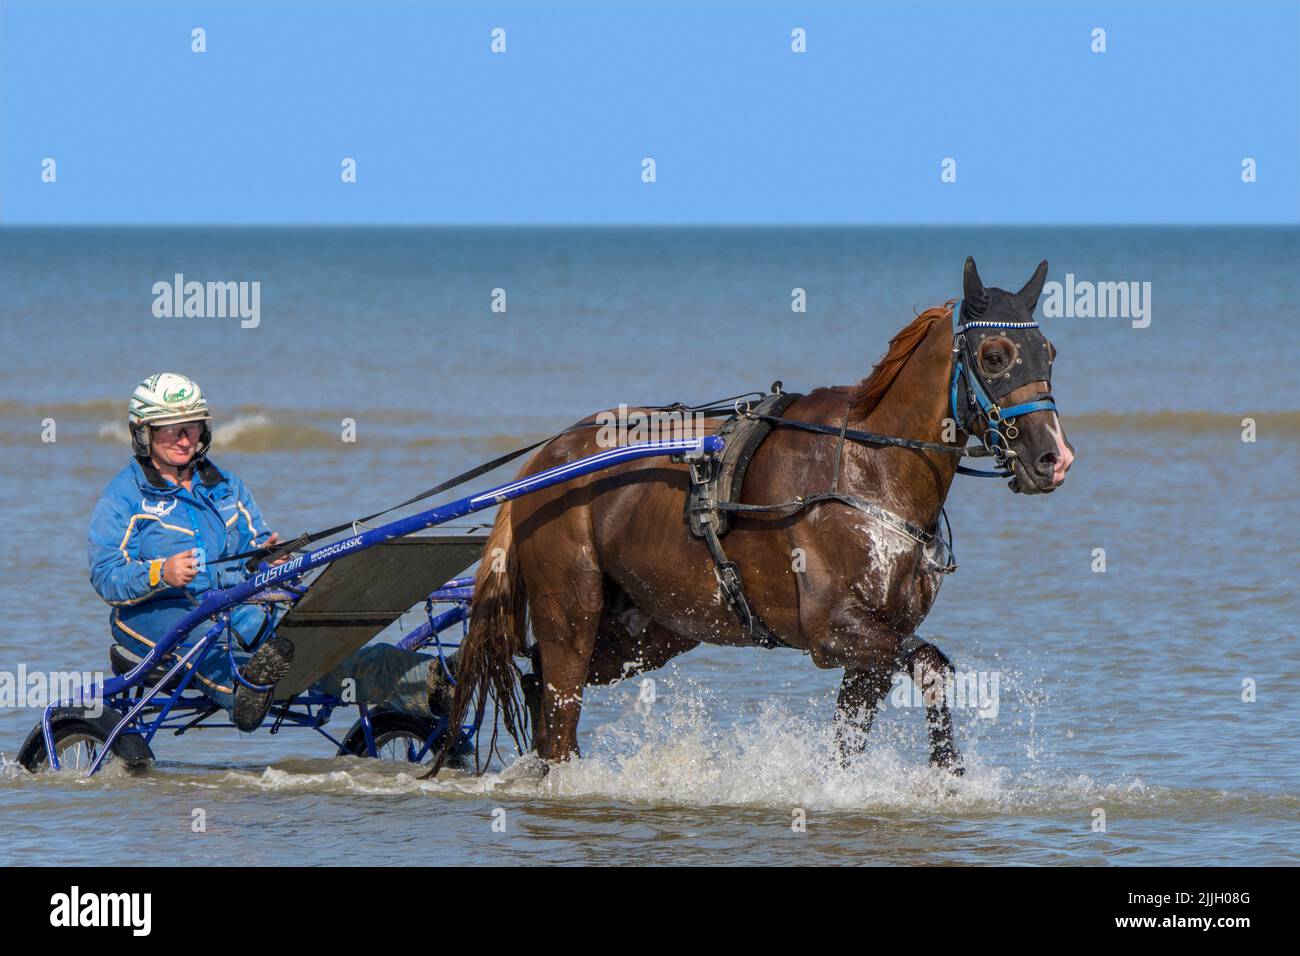 Harness racing horse being exercised on the beach, showing driver riding a two-wheeled cart called a sulky through shallow sea water Stock Photo